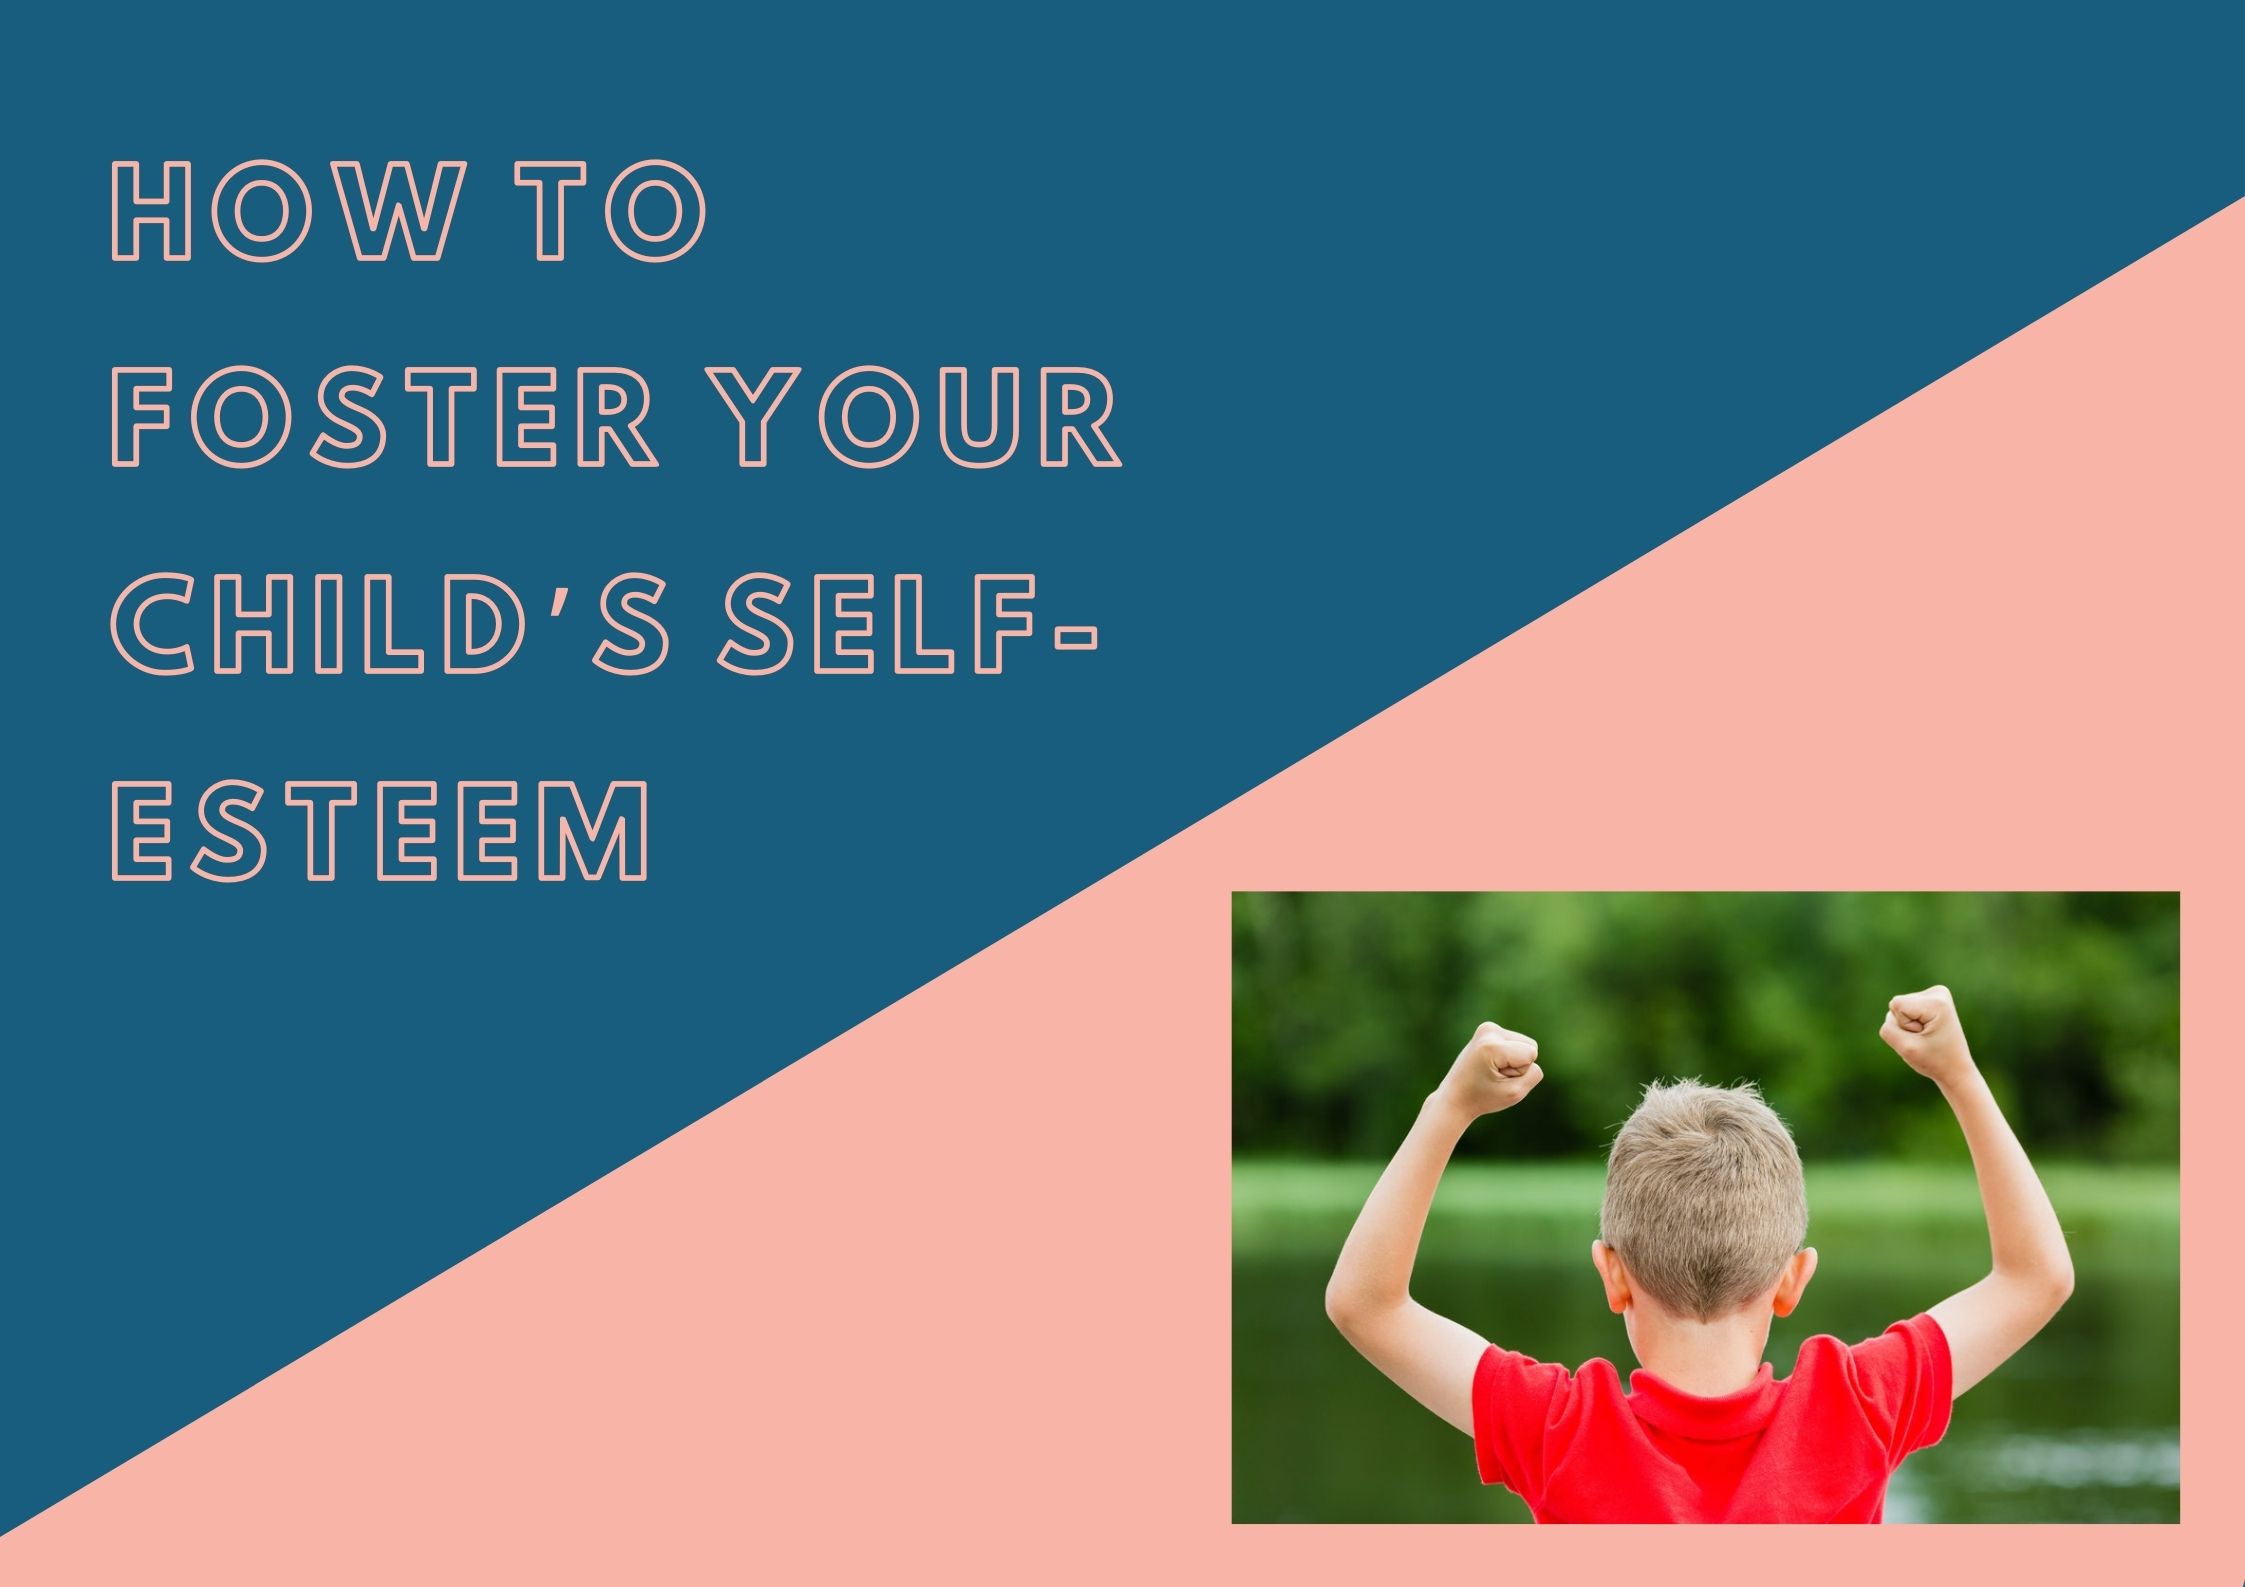 How to foster your child’s self-esteem